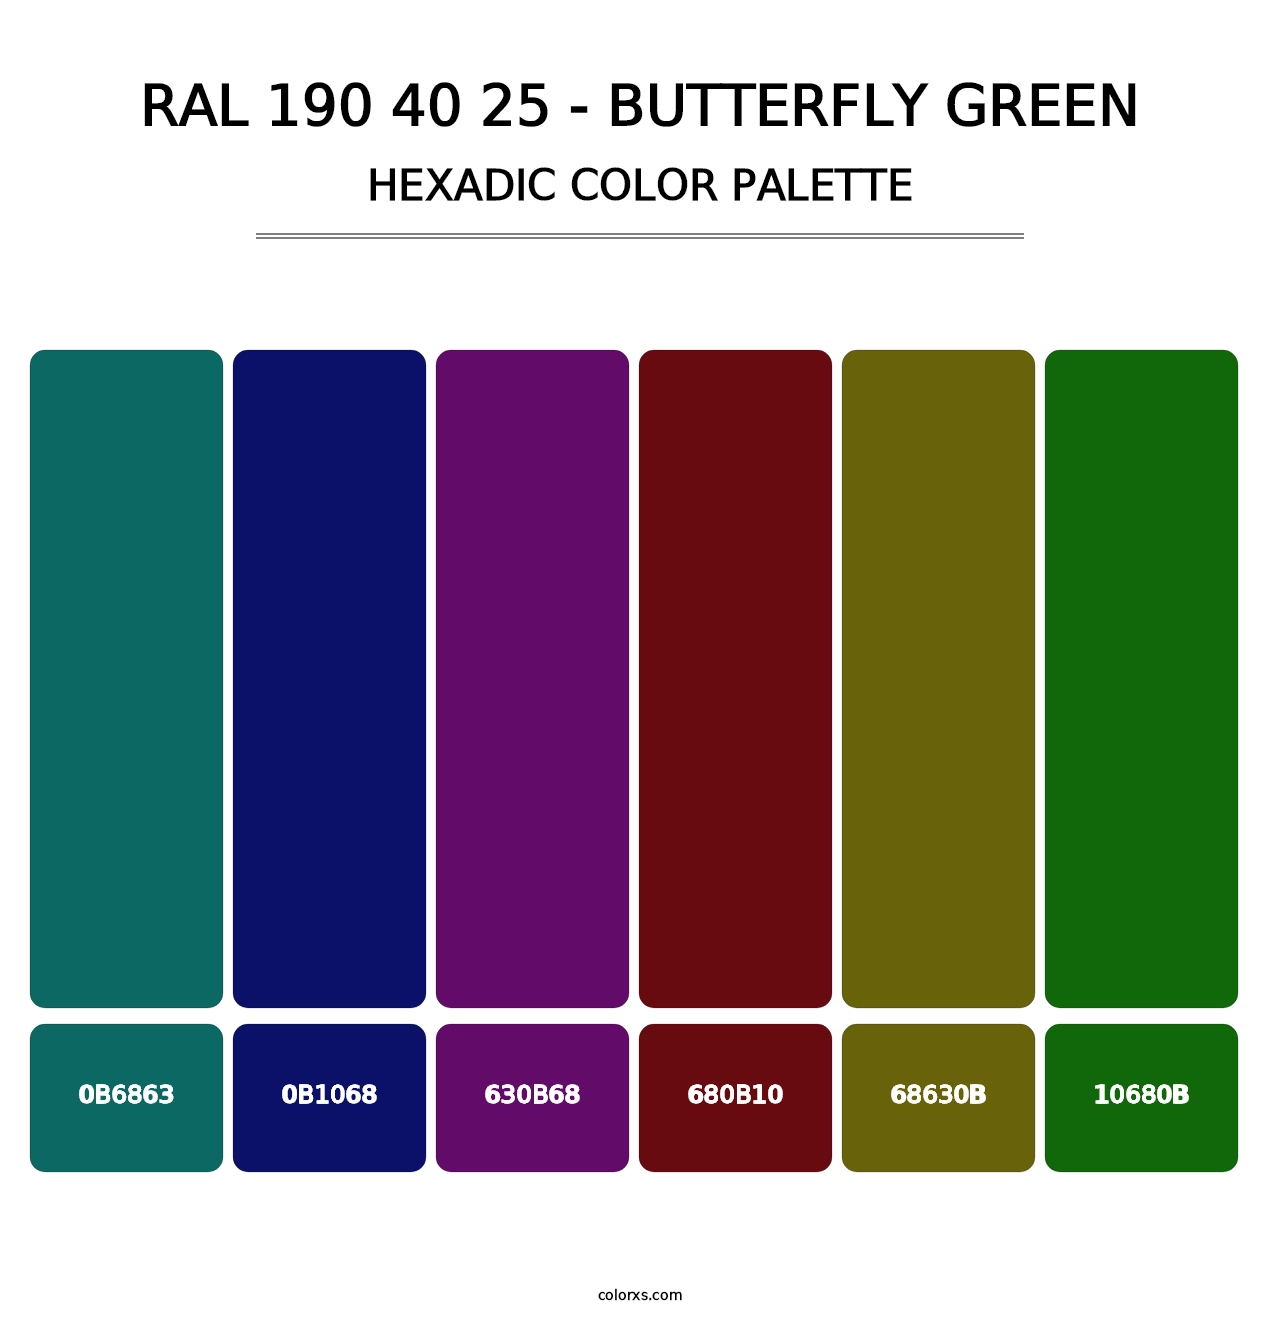 RAL 190 40 25 - Butterfly Green - Hexadic Color Palette